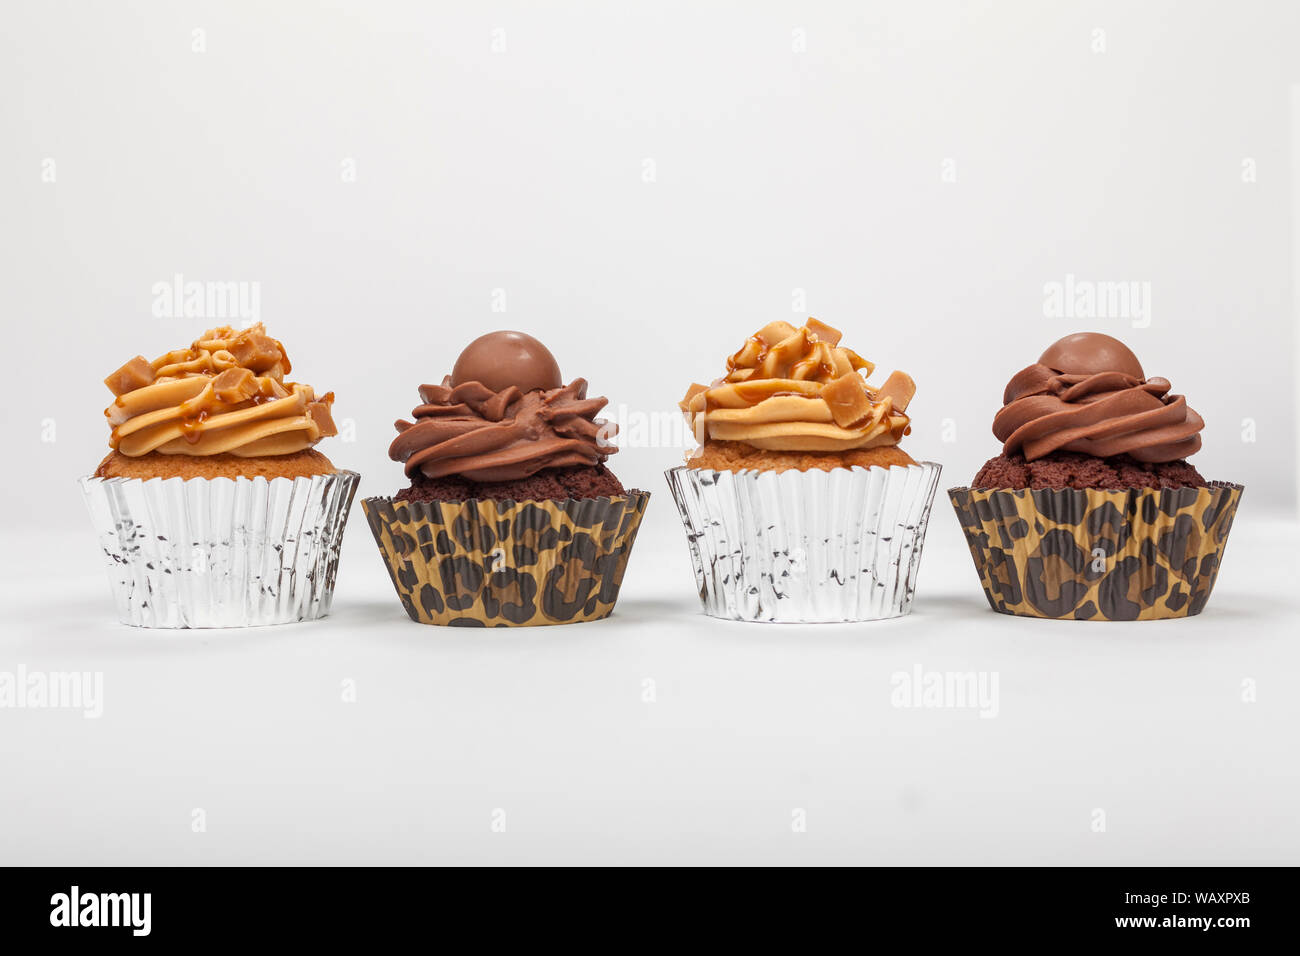 Four cup cakes with icing or frosting, two chocolate and two caramel, photographed on a white background Stock Photo